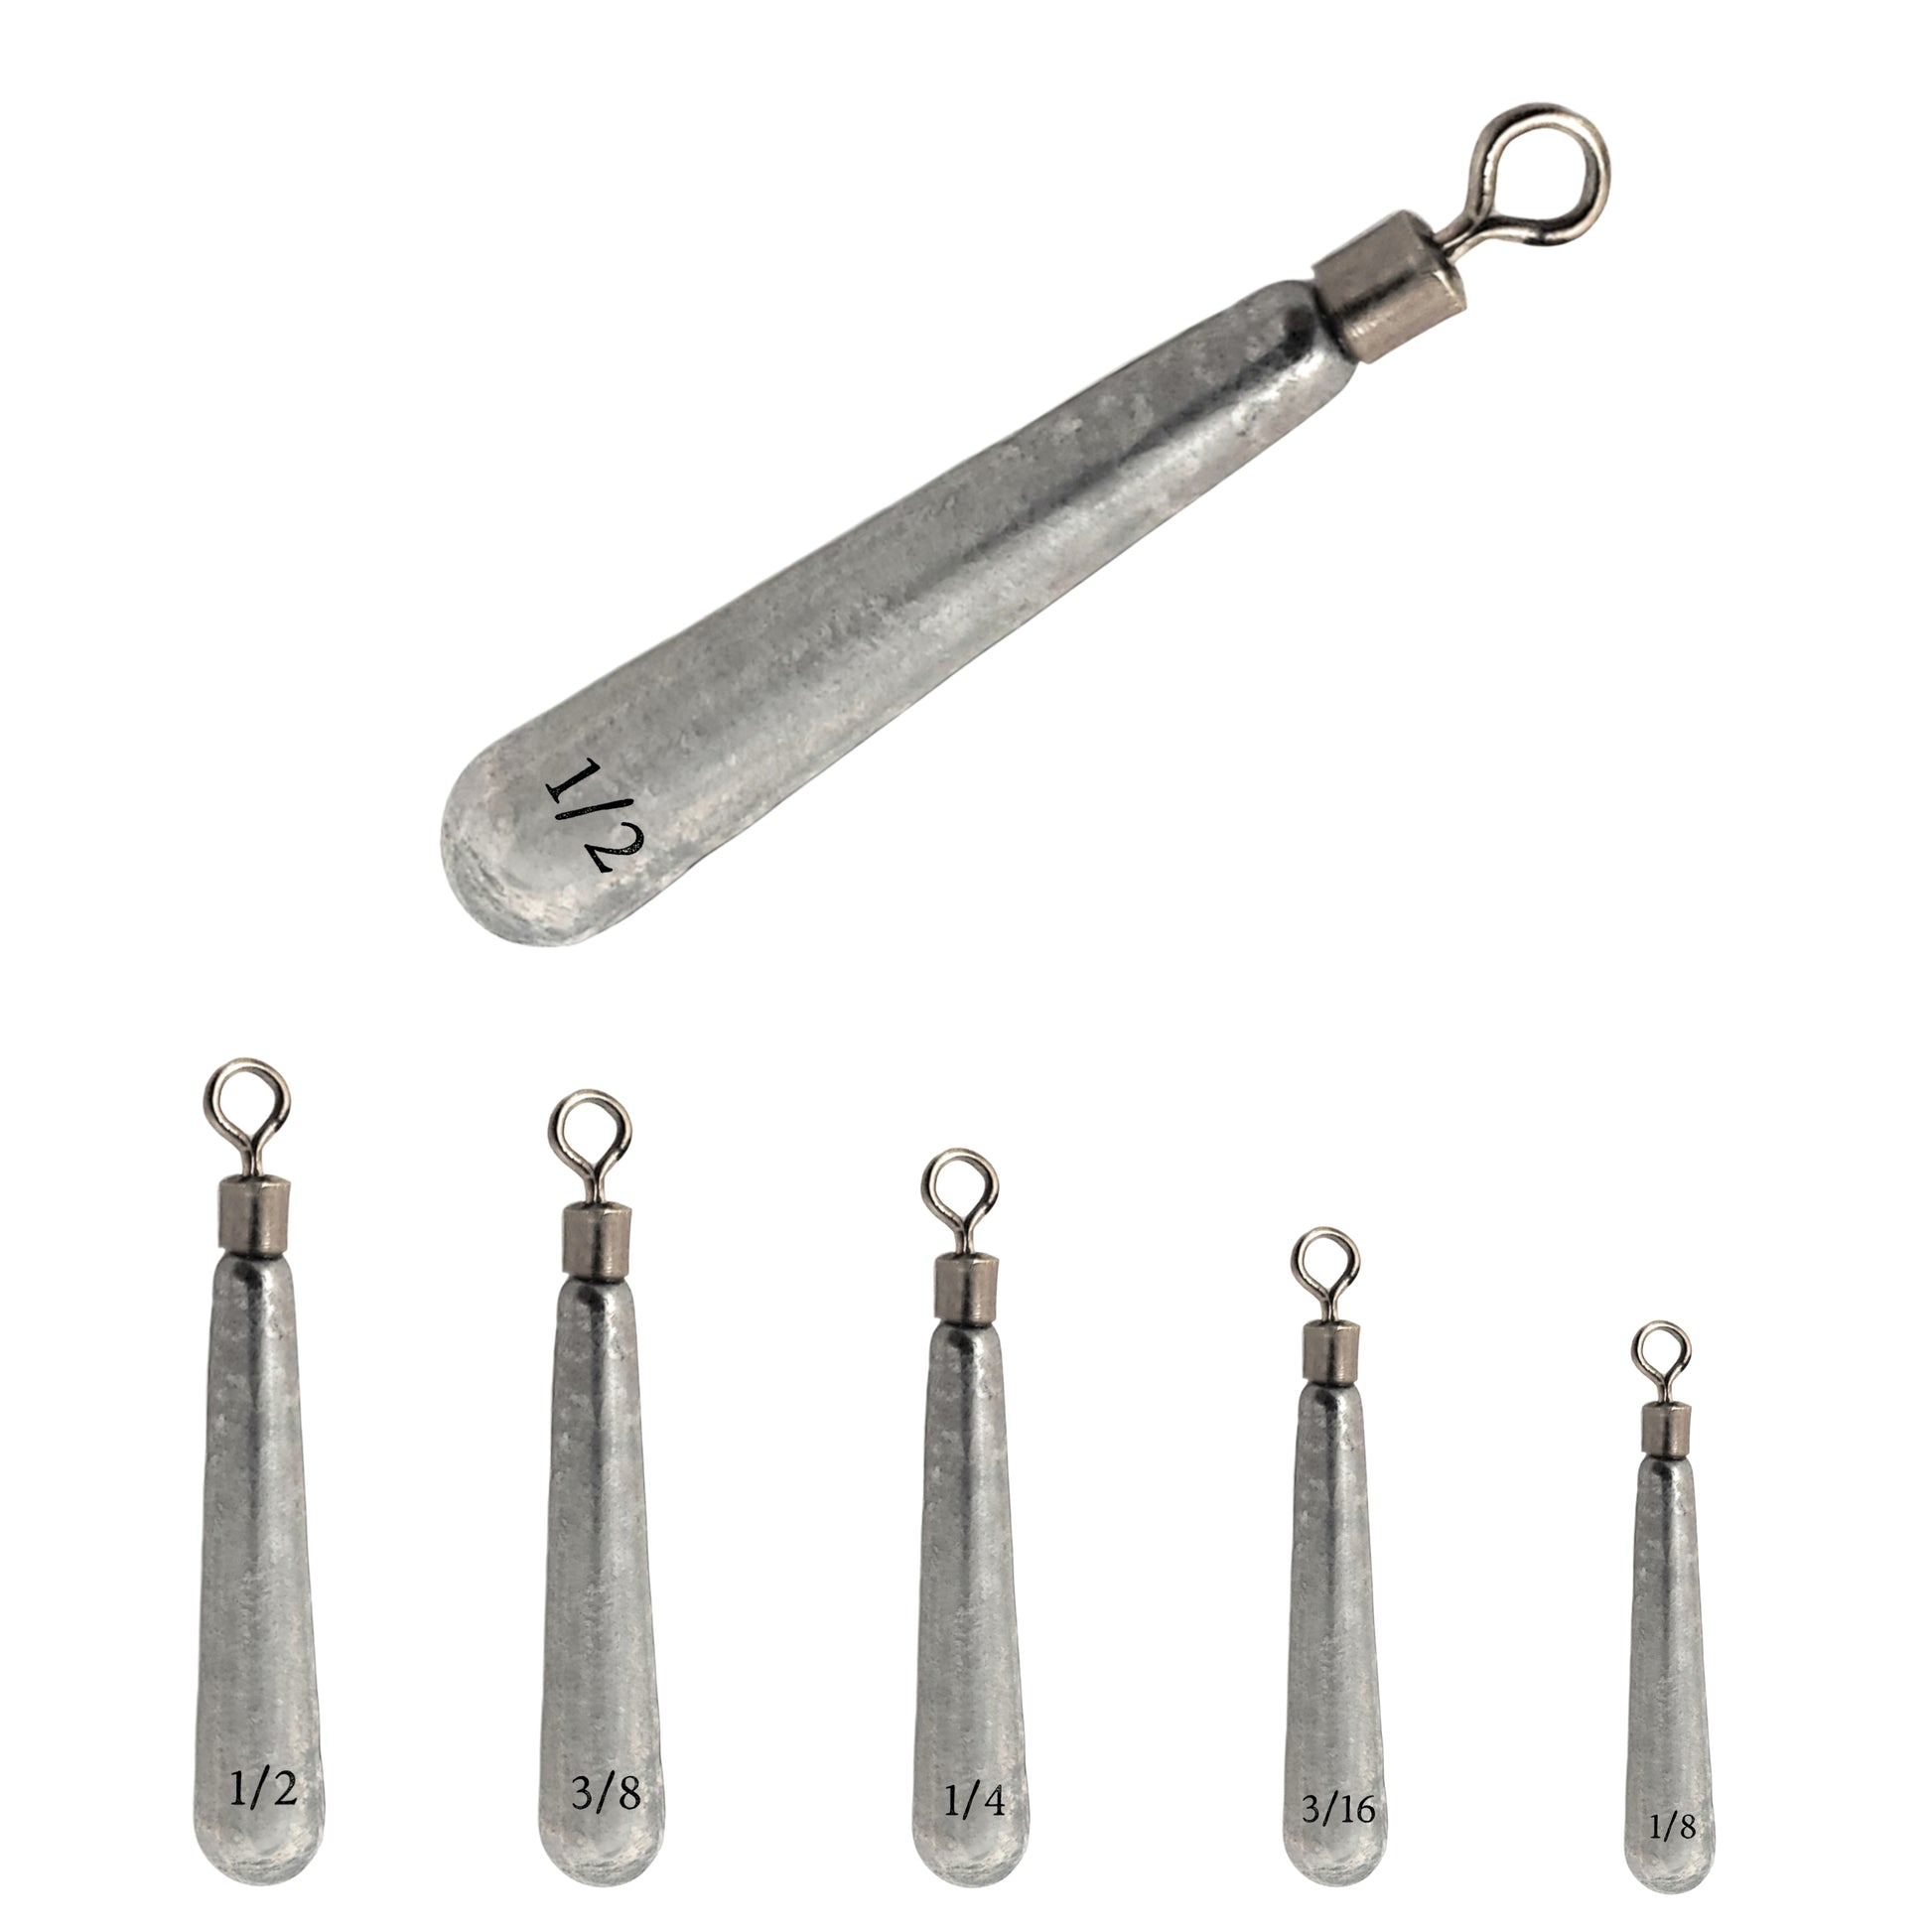 S & J's TACKLE BOX 1 oz Lead Bank Weights - 10 PER Pack